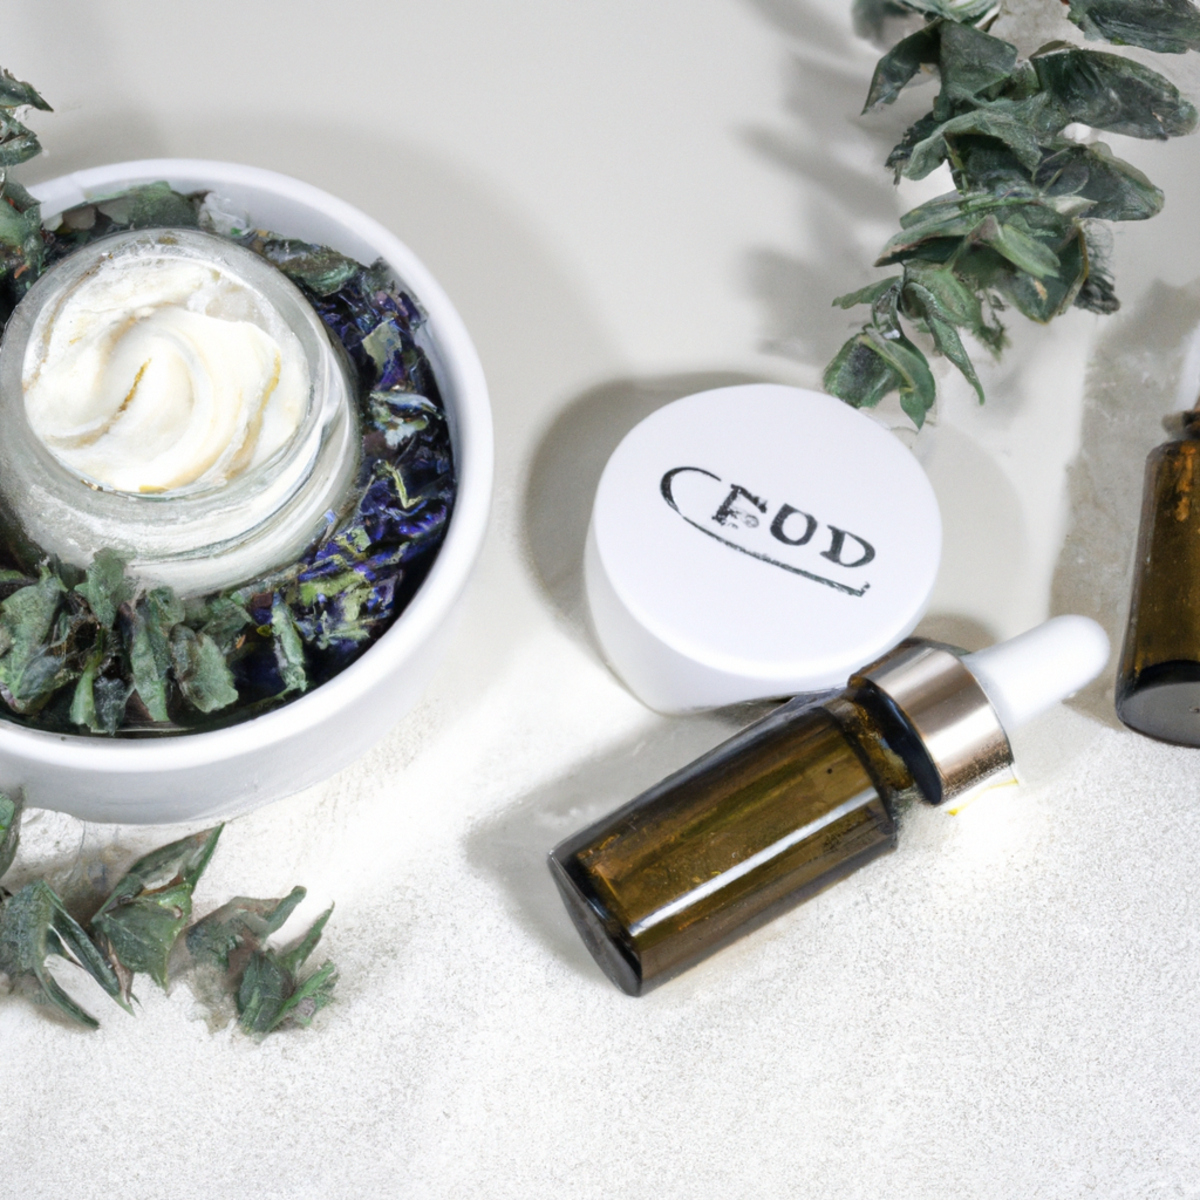 Upgrade your natural skin care routines with the ultimate CBD-infused indulgence. This luxurious cream and oil combo, paired with calming lavender and eucalyptus, will leave you feeling refreshed and rejuvenated. Don't forget to add in some self-care tools like a jade roller and soft-bristled brush for the ultimate pampering experience.